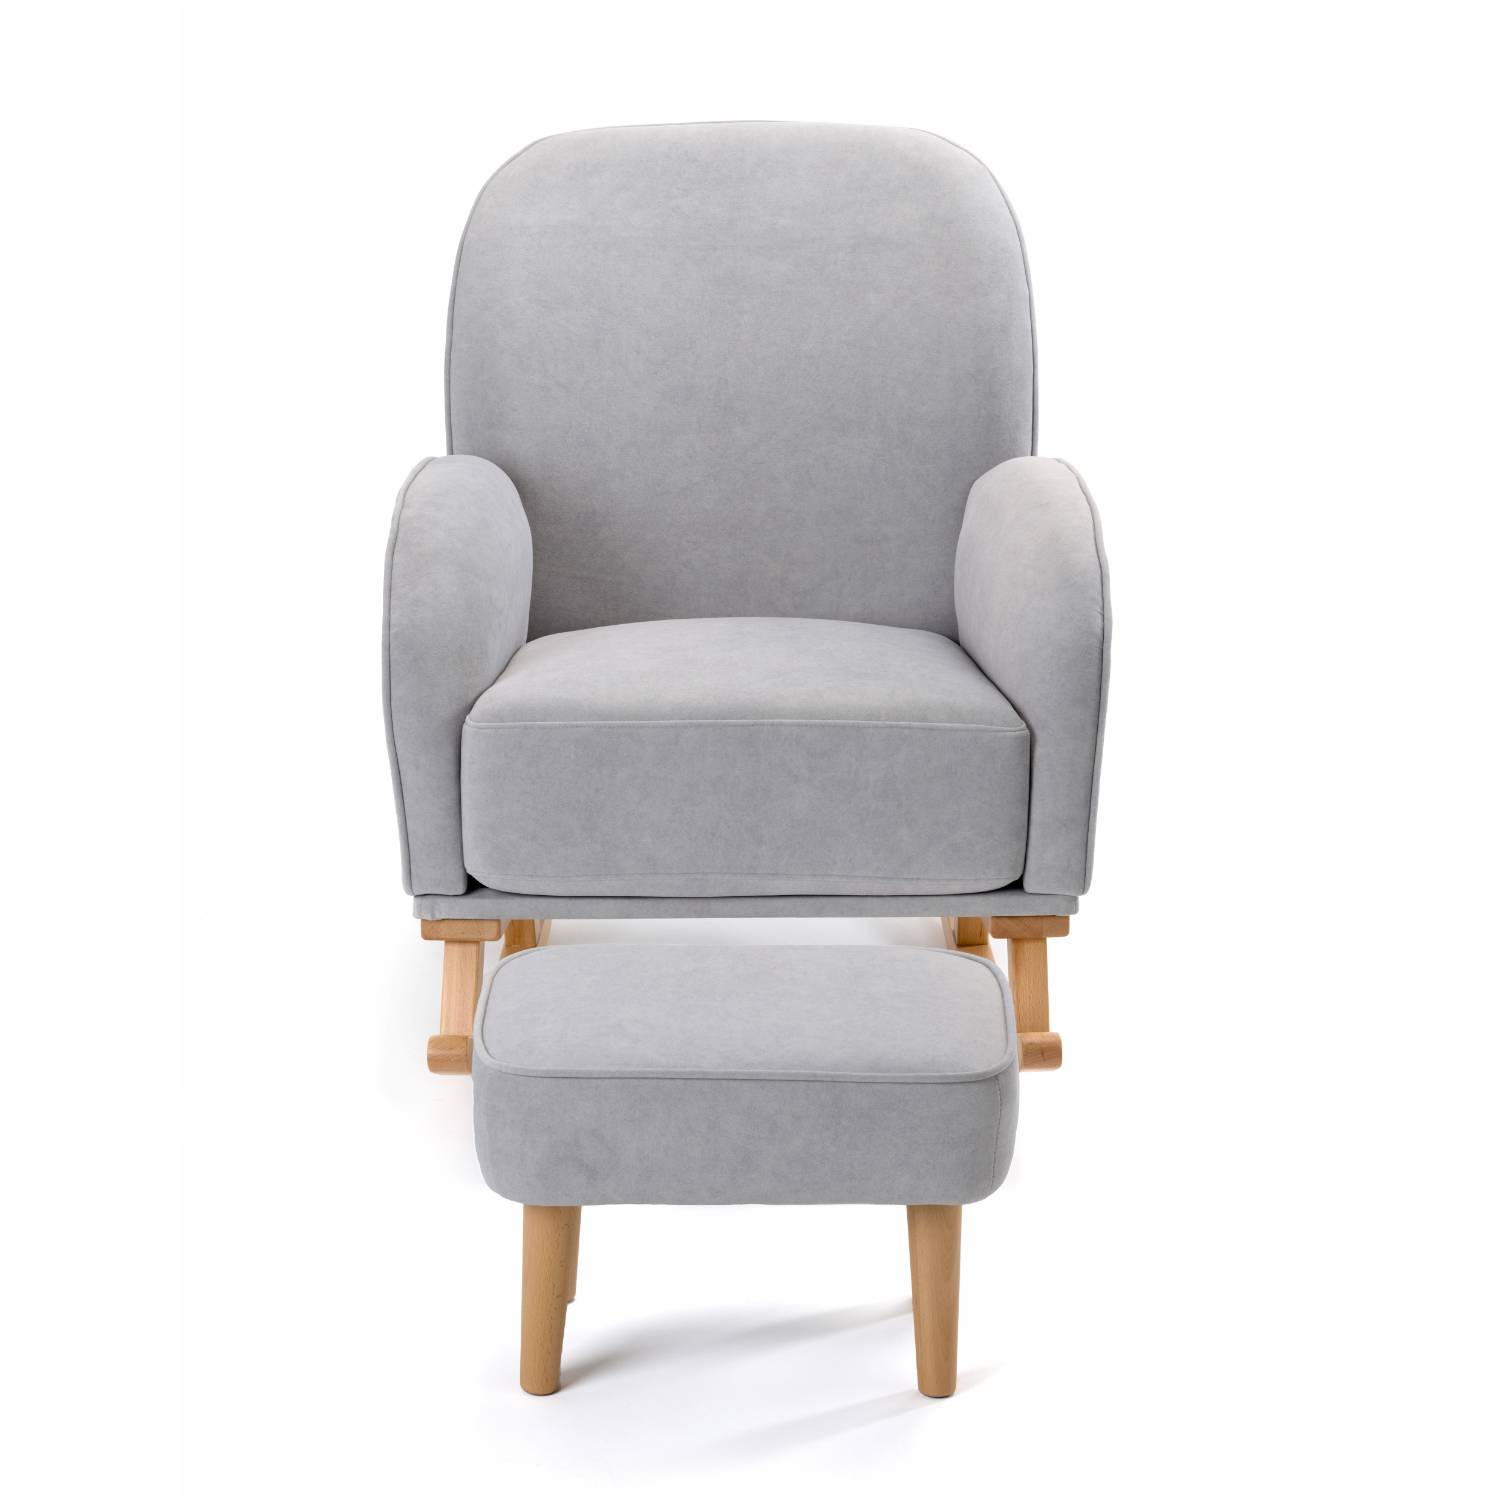 A frontal, straight-on view of the premium Babymore Freya Nursing Chair with Footstool set in modern Grey colour.